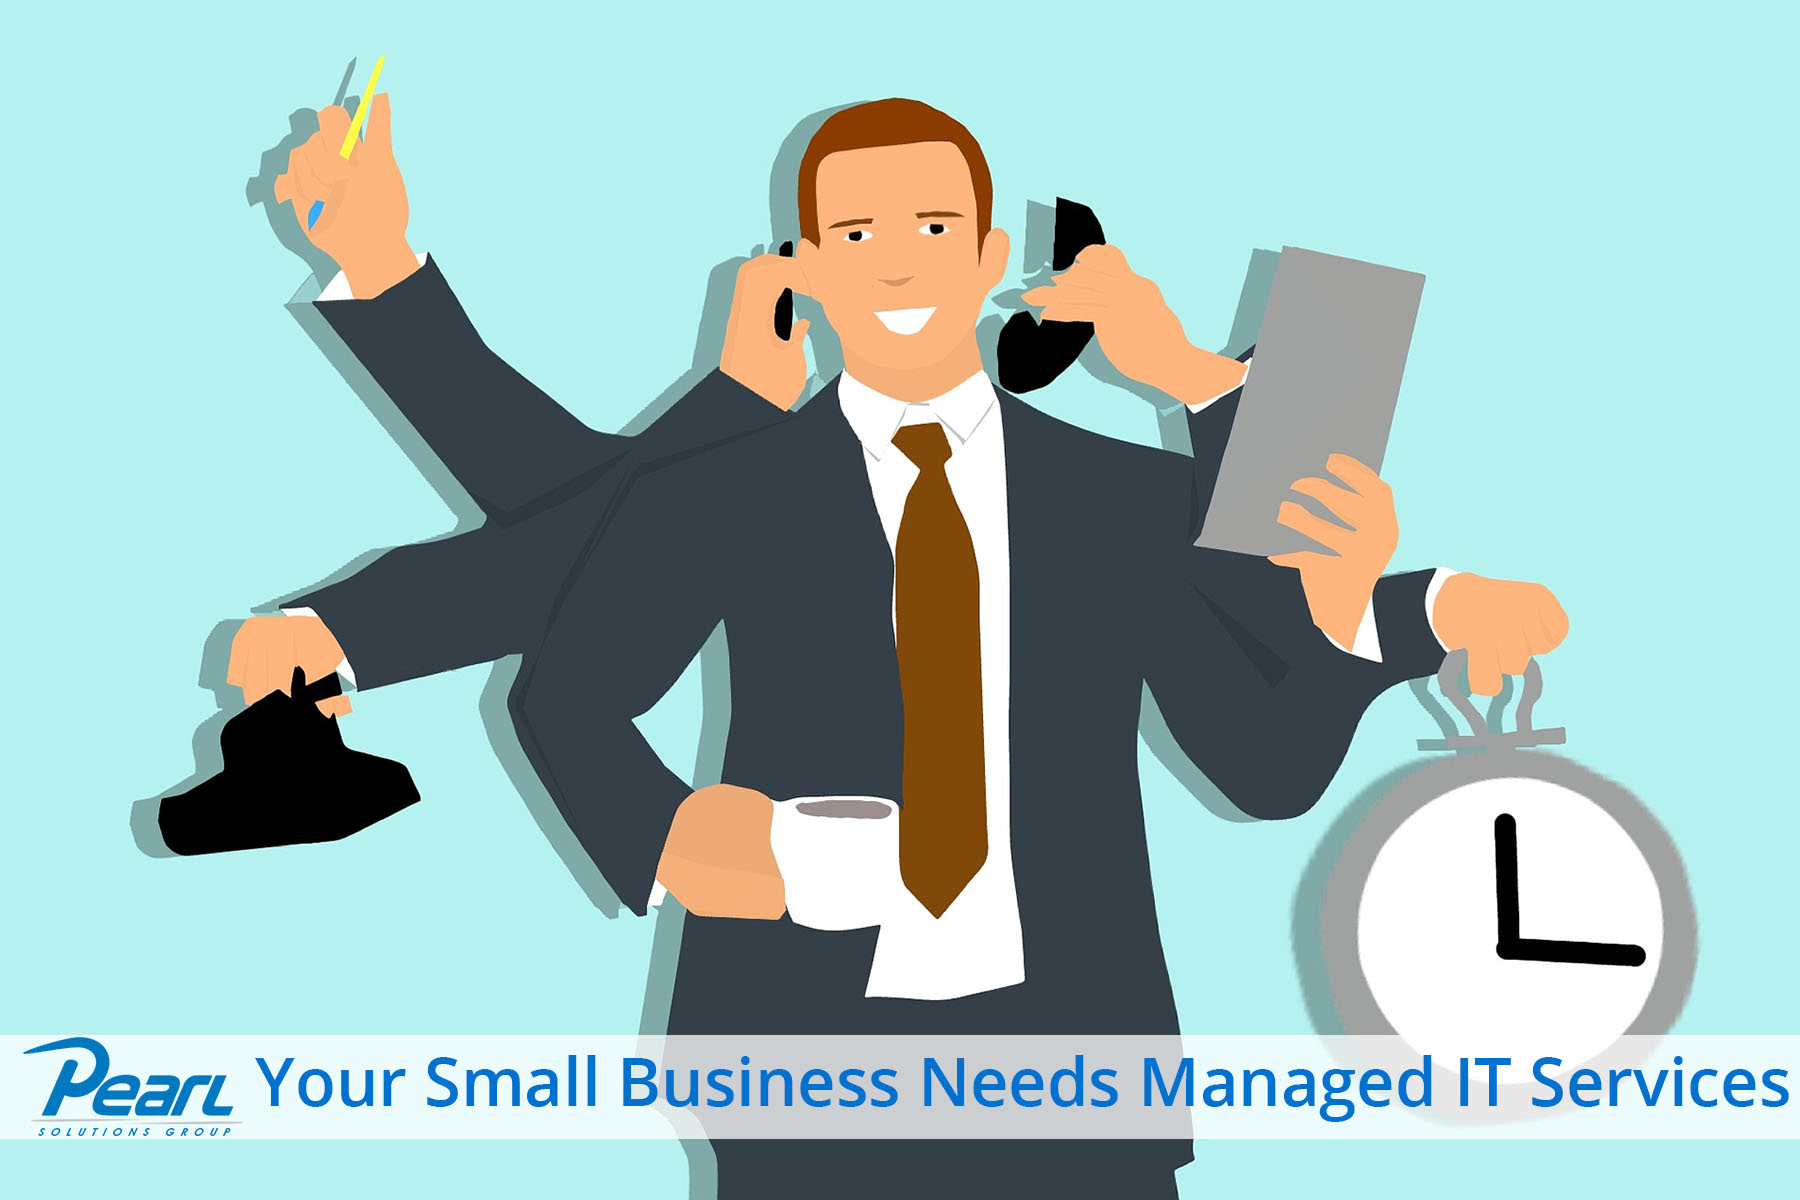 Your Small Business Needs Managed IT Services